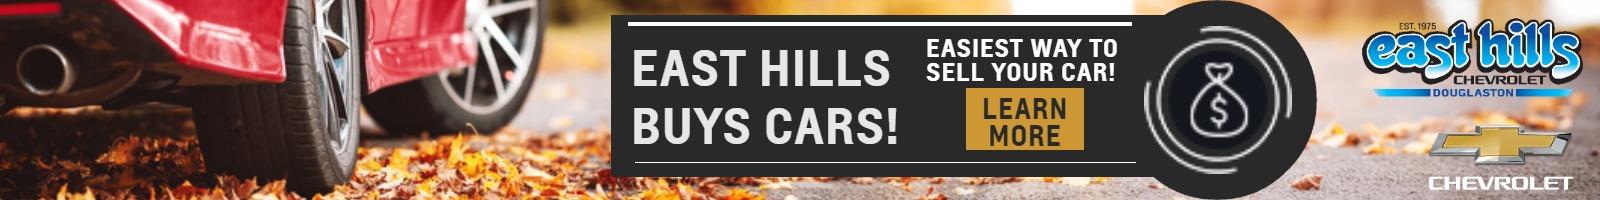 East Hills Buys Cars 
Easiest Way to Sell Your Car